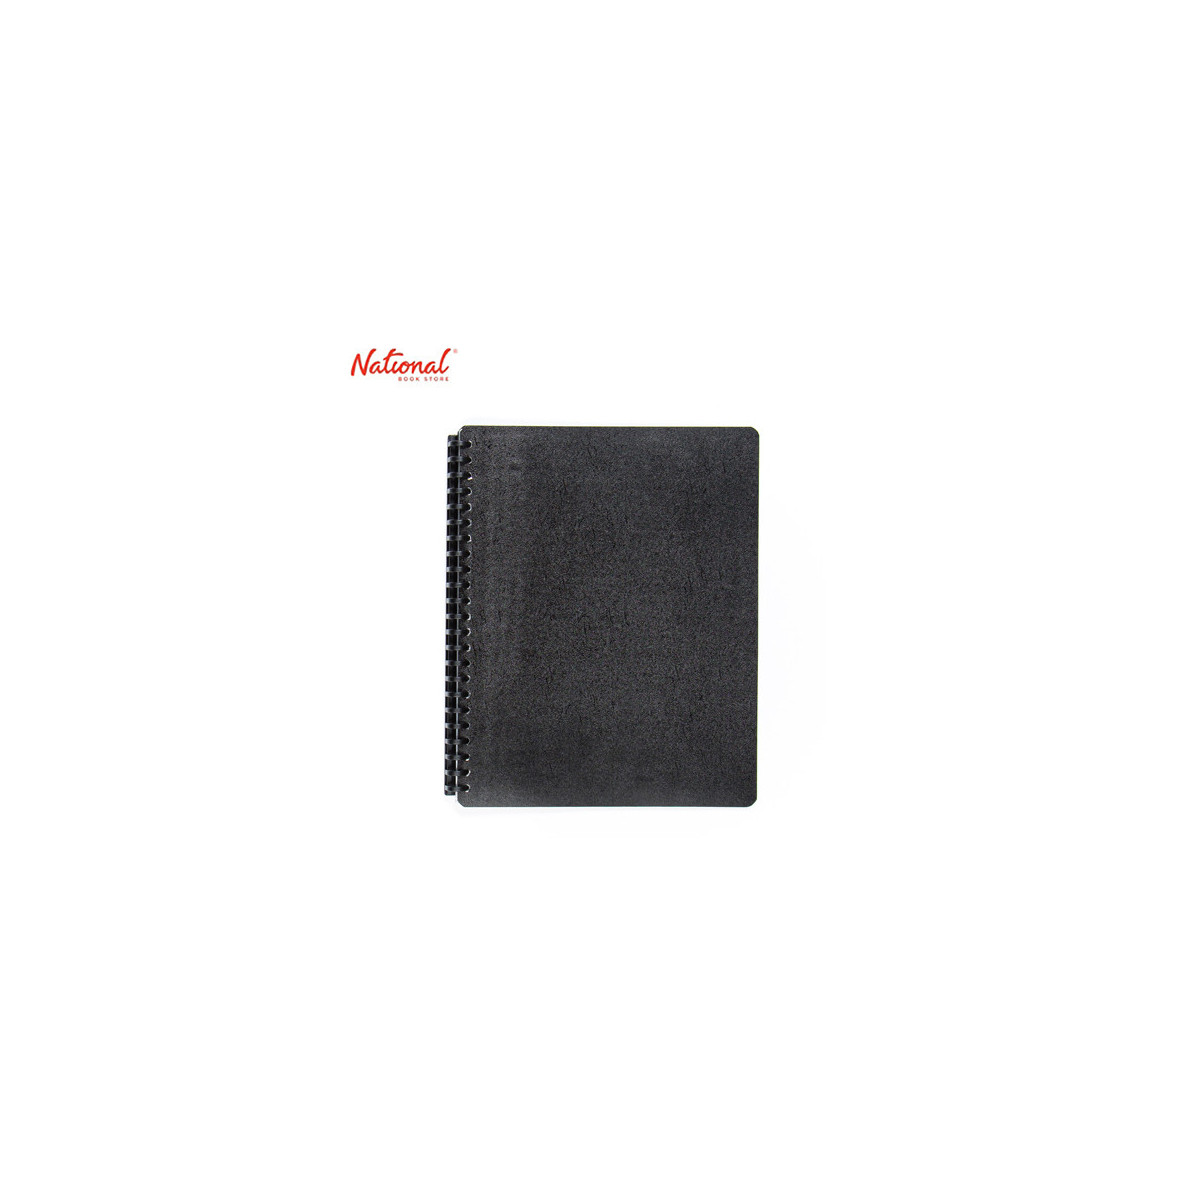 SEAGULL CLEARBOOK REFILLABLE 2023  SHORT 20SHEETS 23HOLES PLAIN BLACK